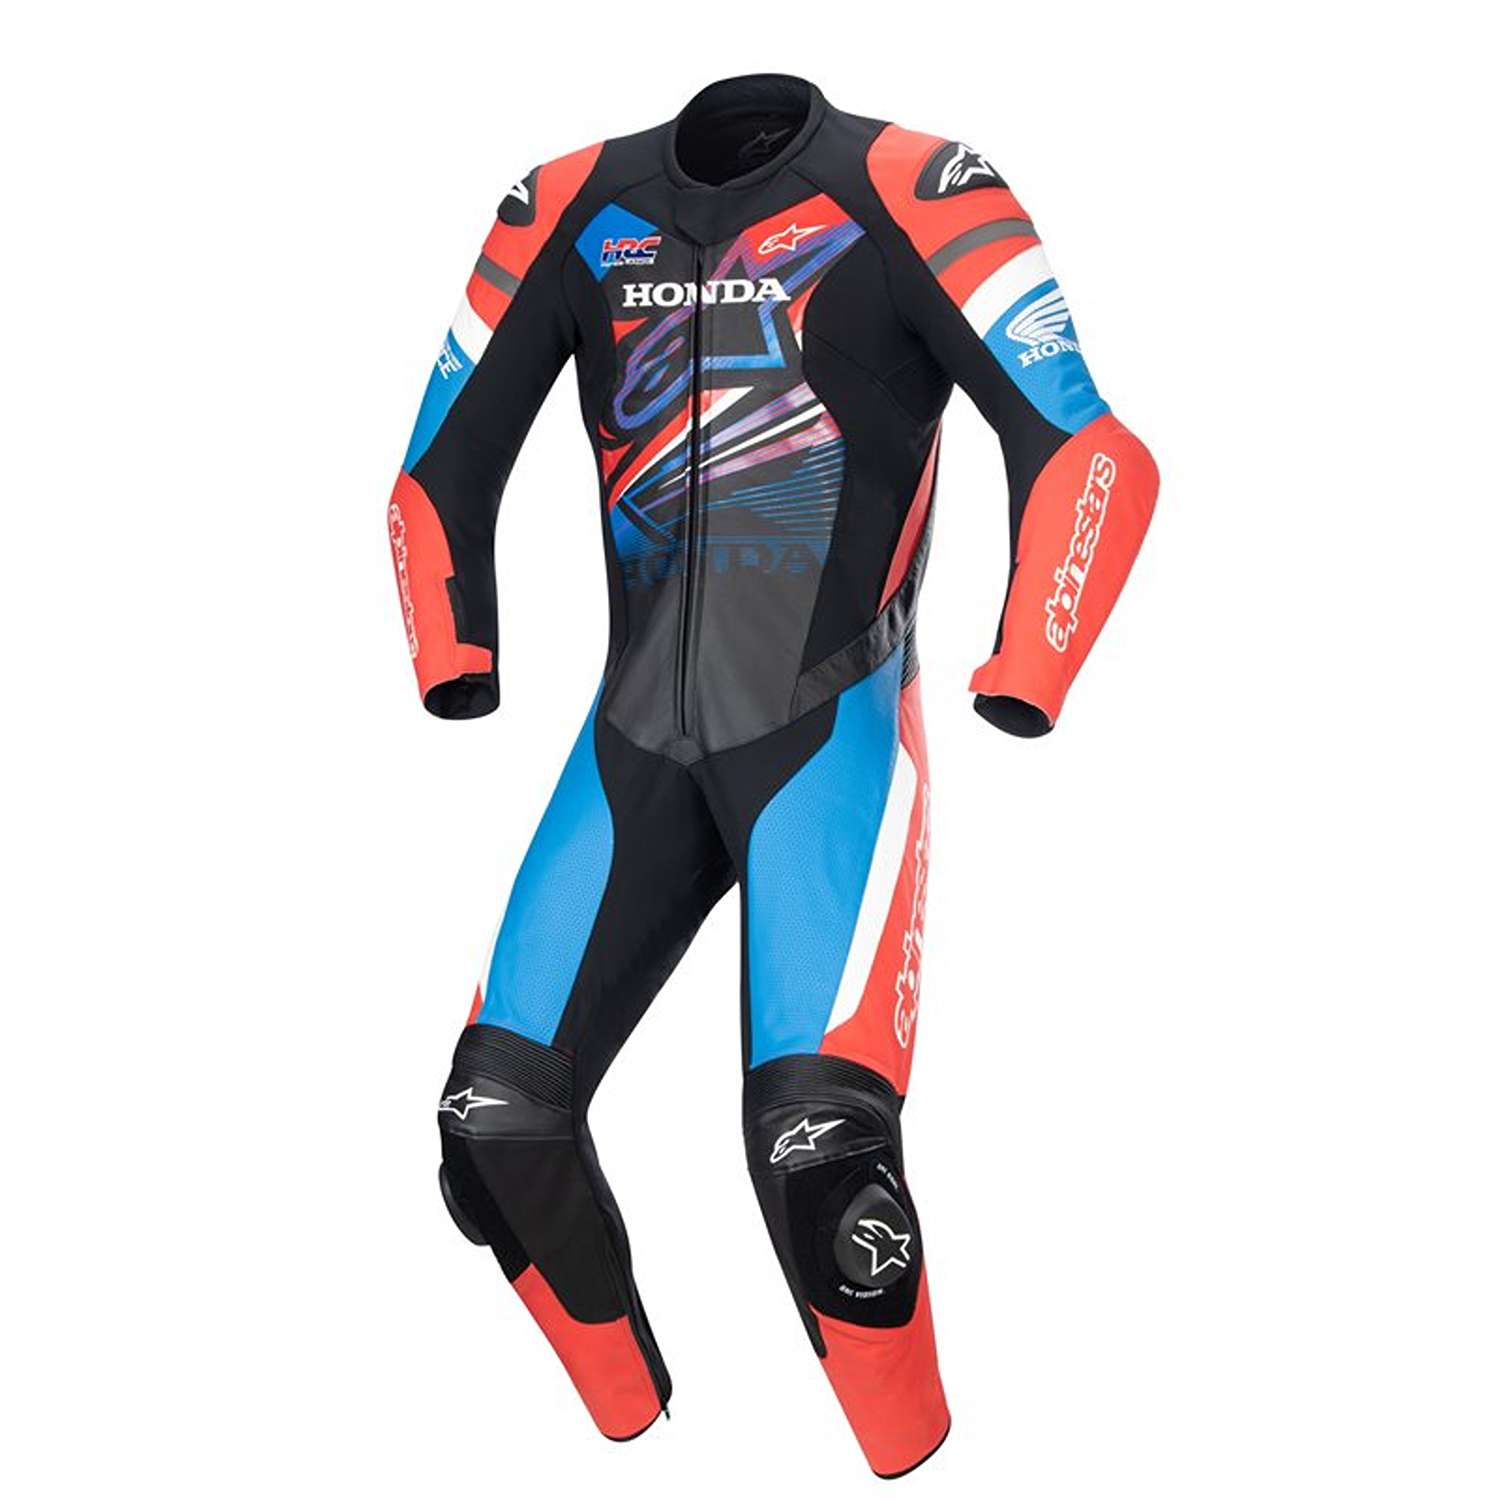 Image of EU Alpinestars Honda Gp Force Leather Suit Black Bright Red Blue Taille 58